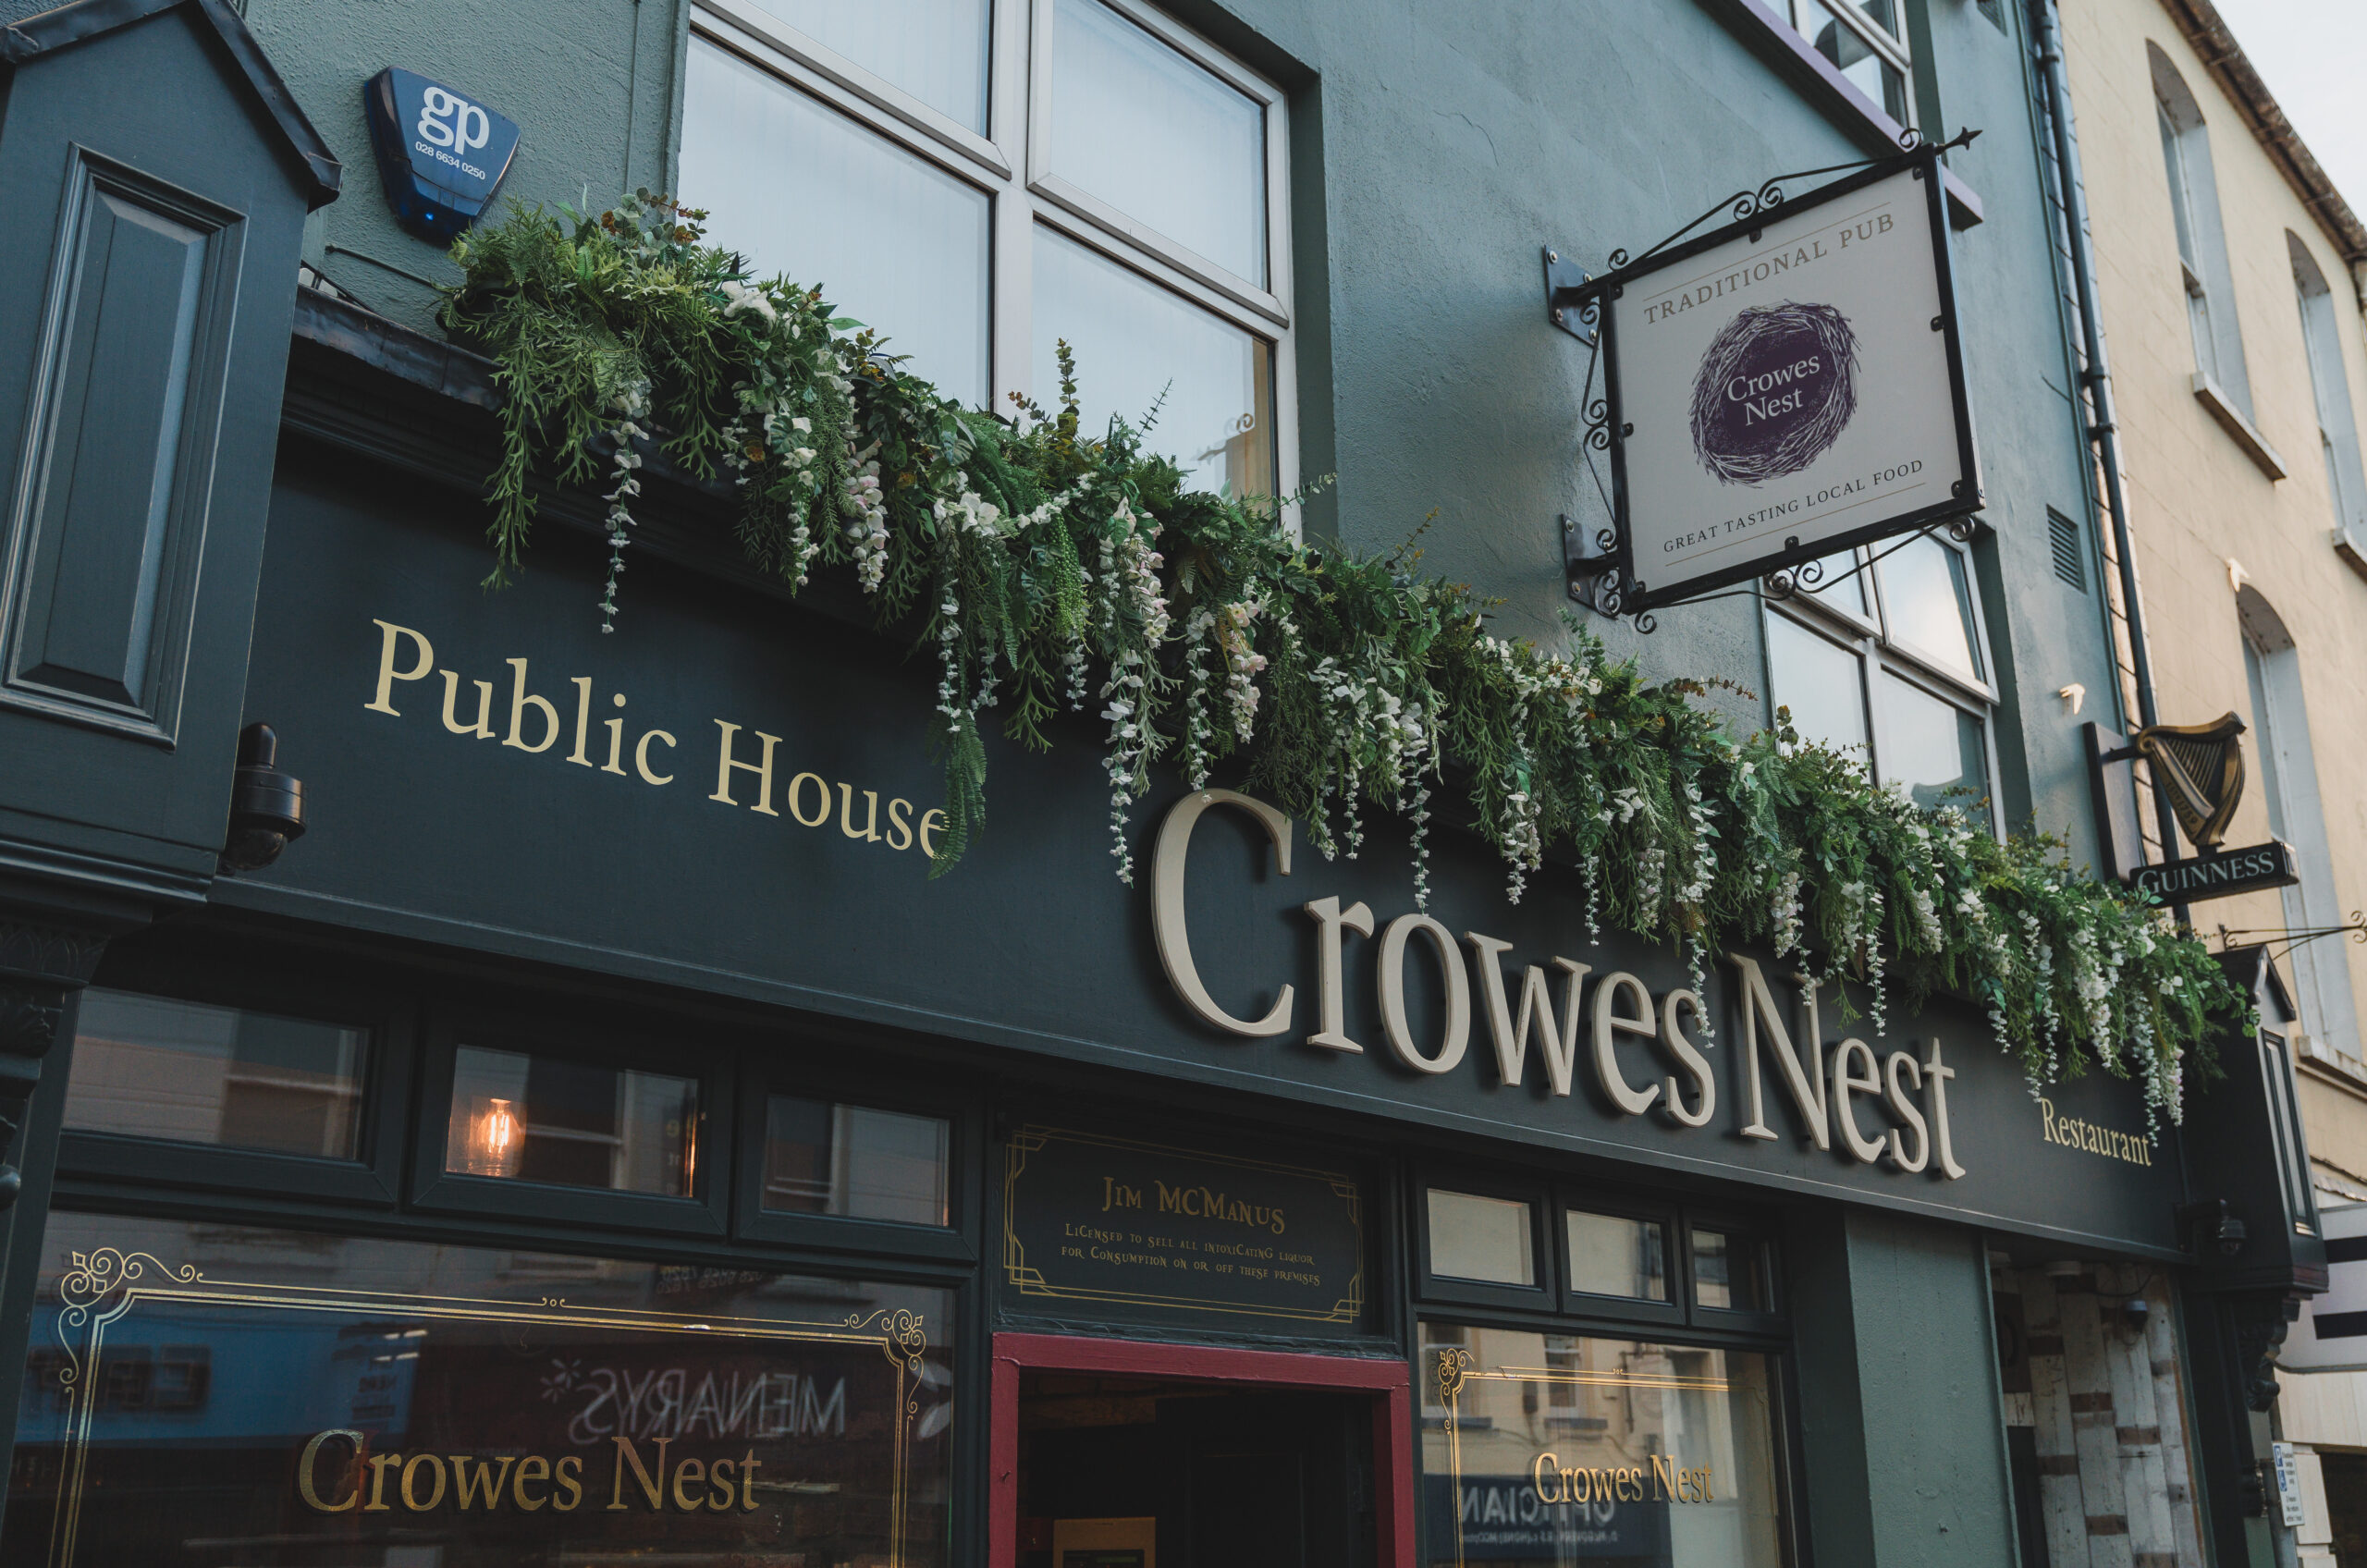 Crowes Nest